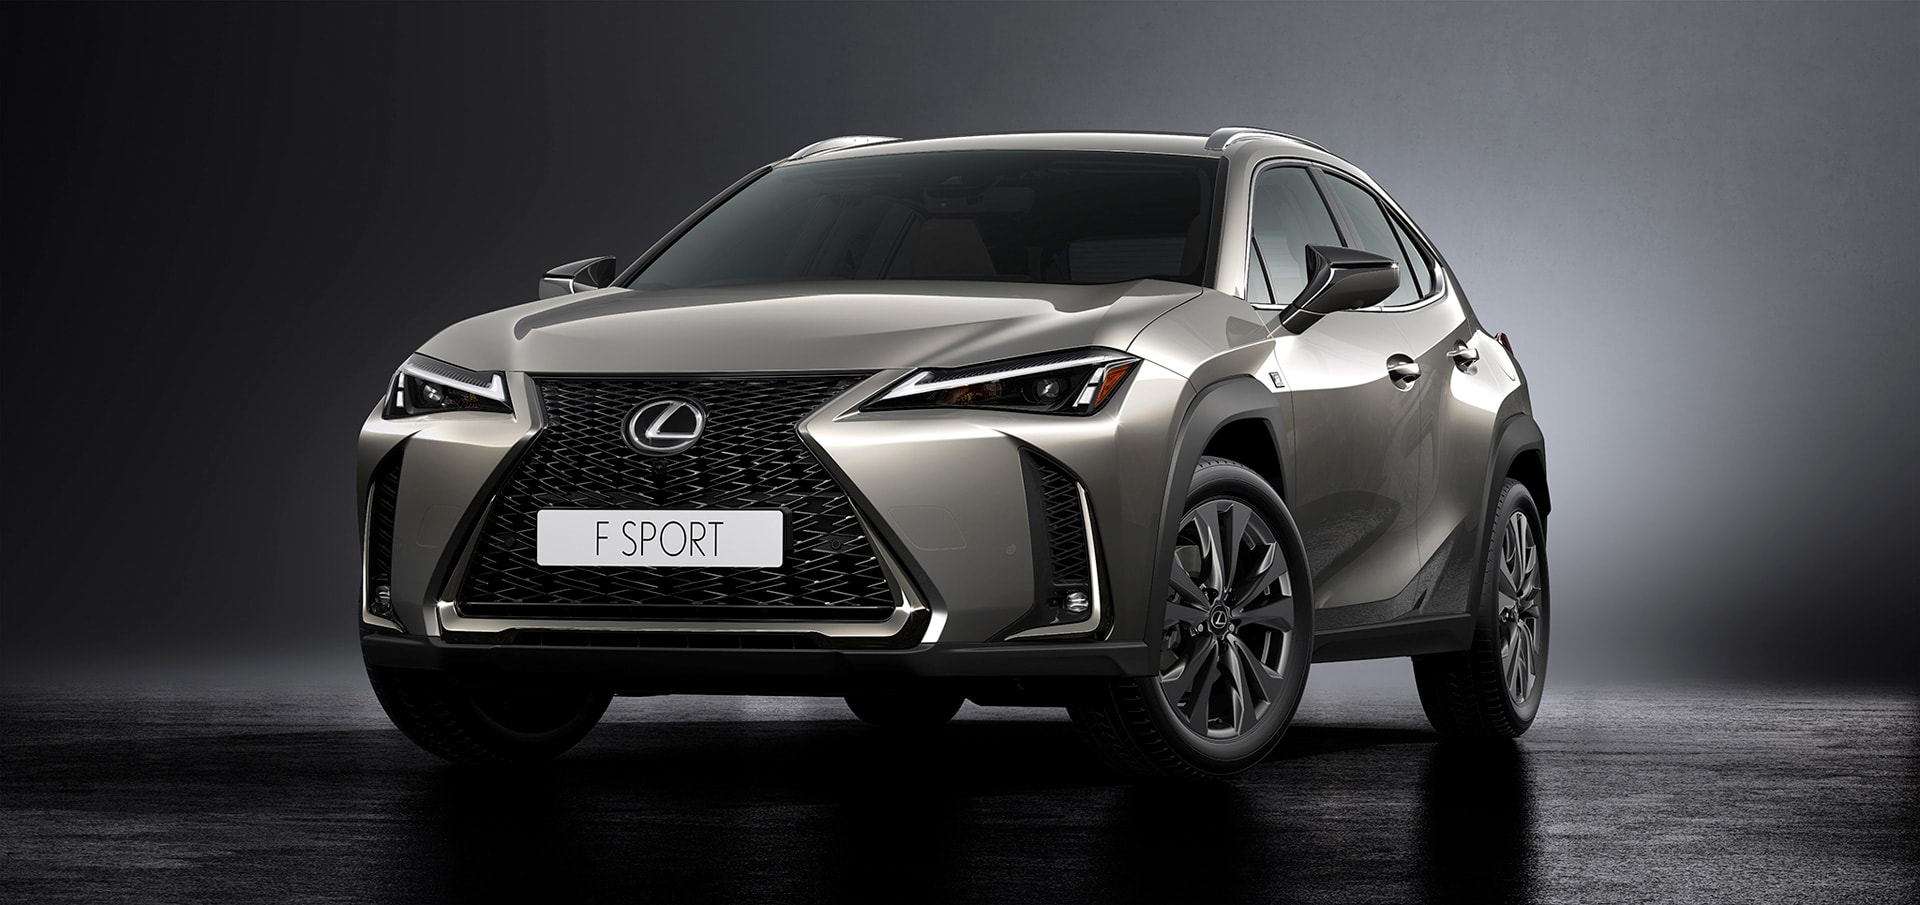 Upgraded 2023 Lexus UX Features Stiffer Body, Expanded Safety, Latest